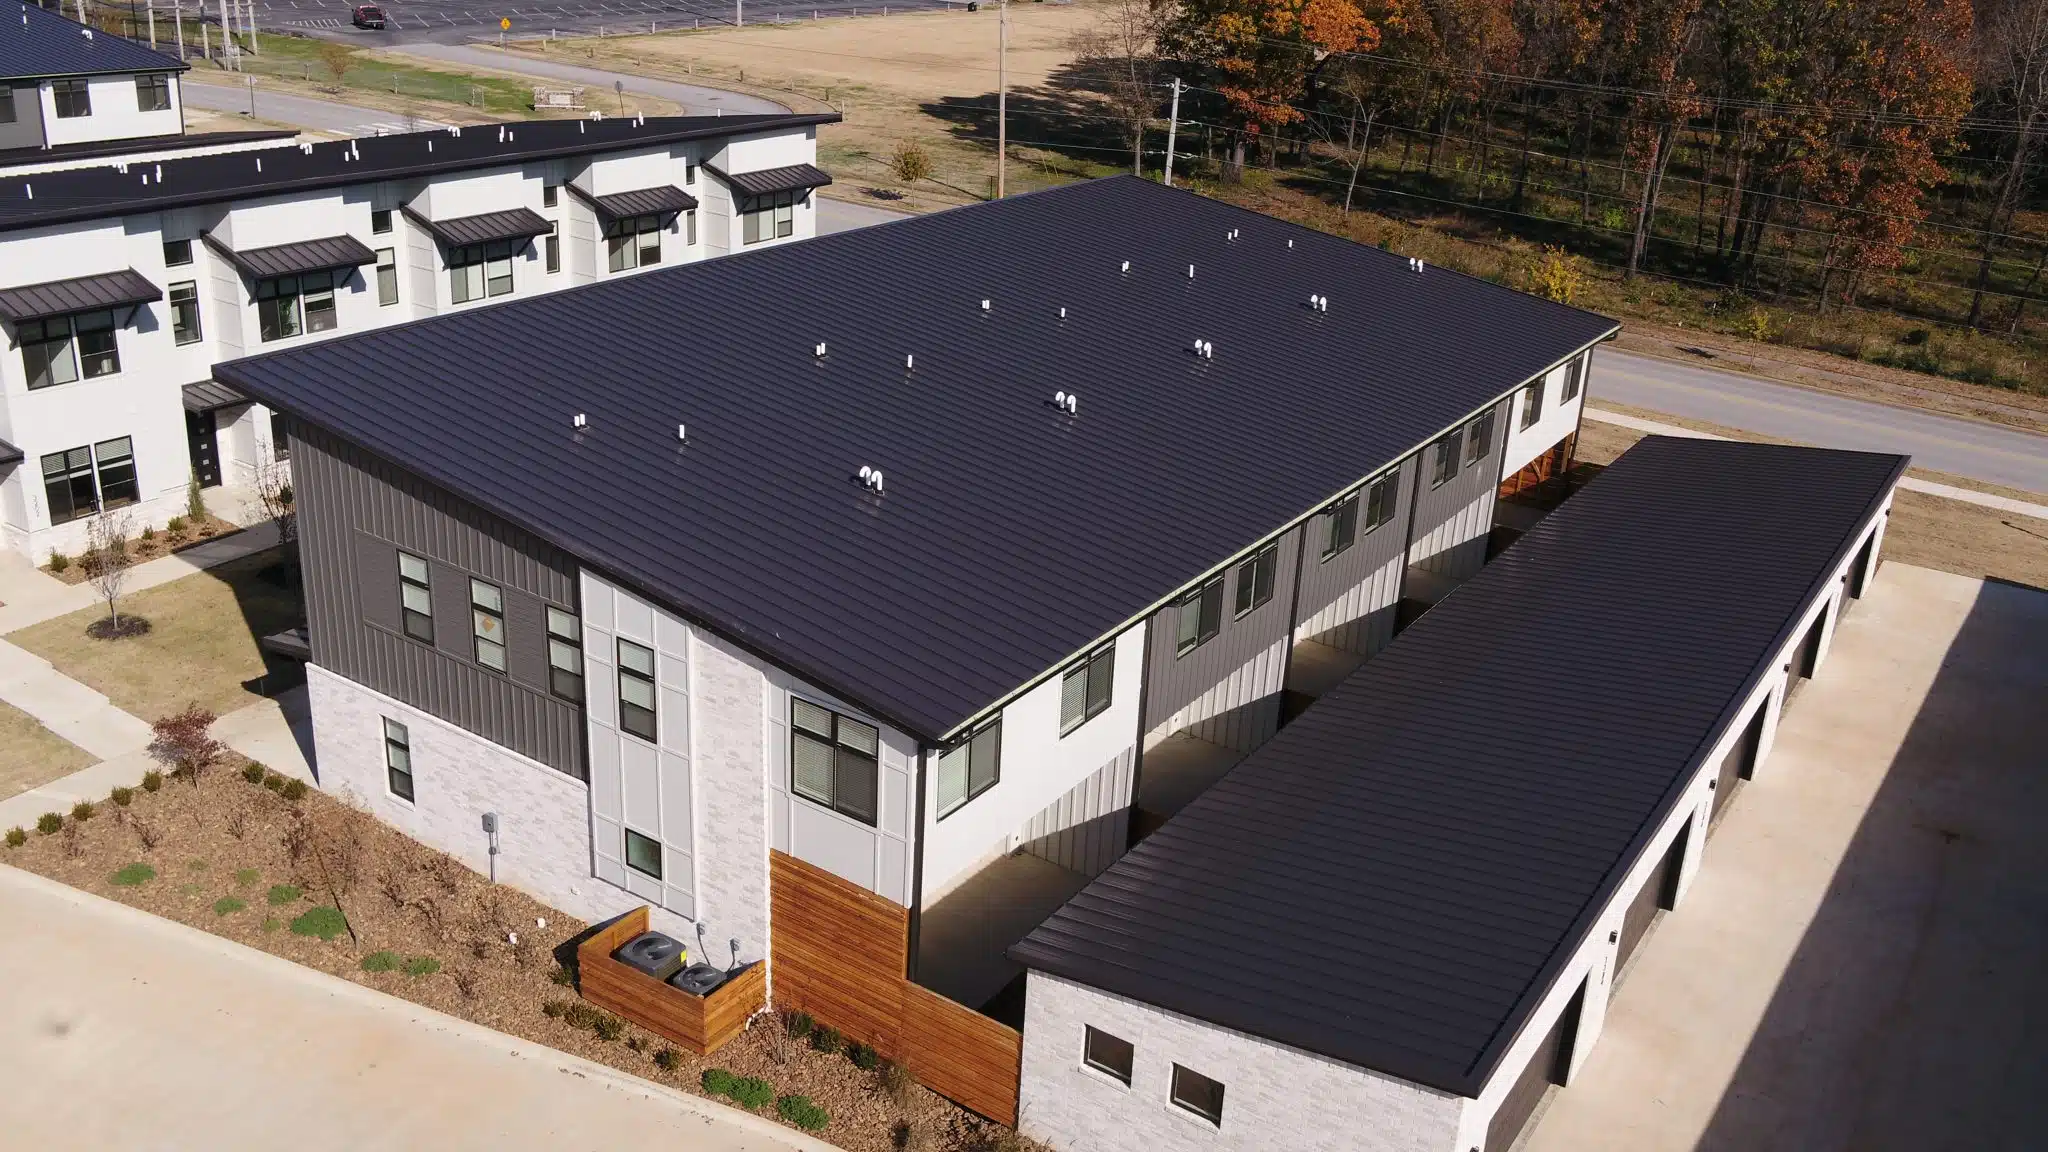 Townhouses with a Central Snap metal roof in dark bronze